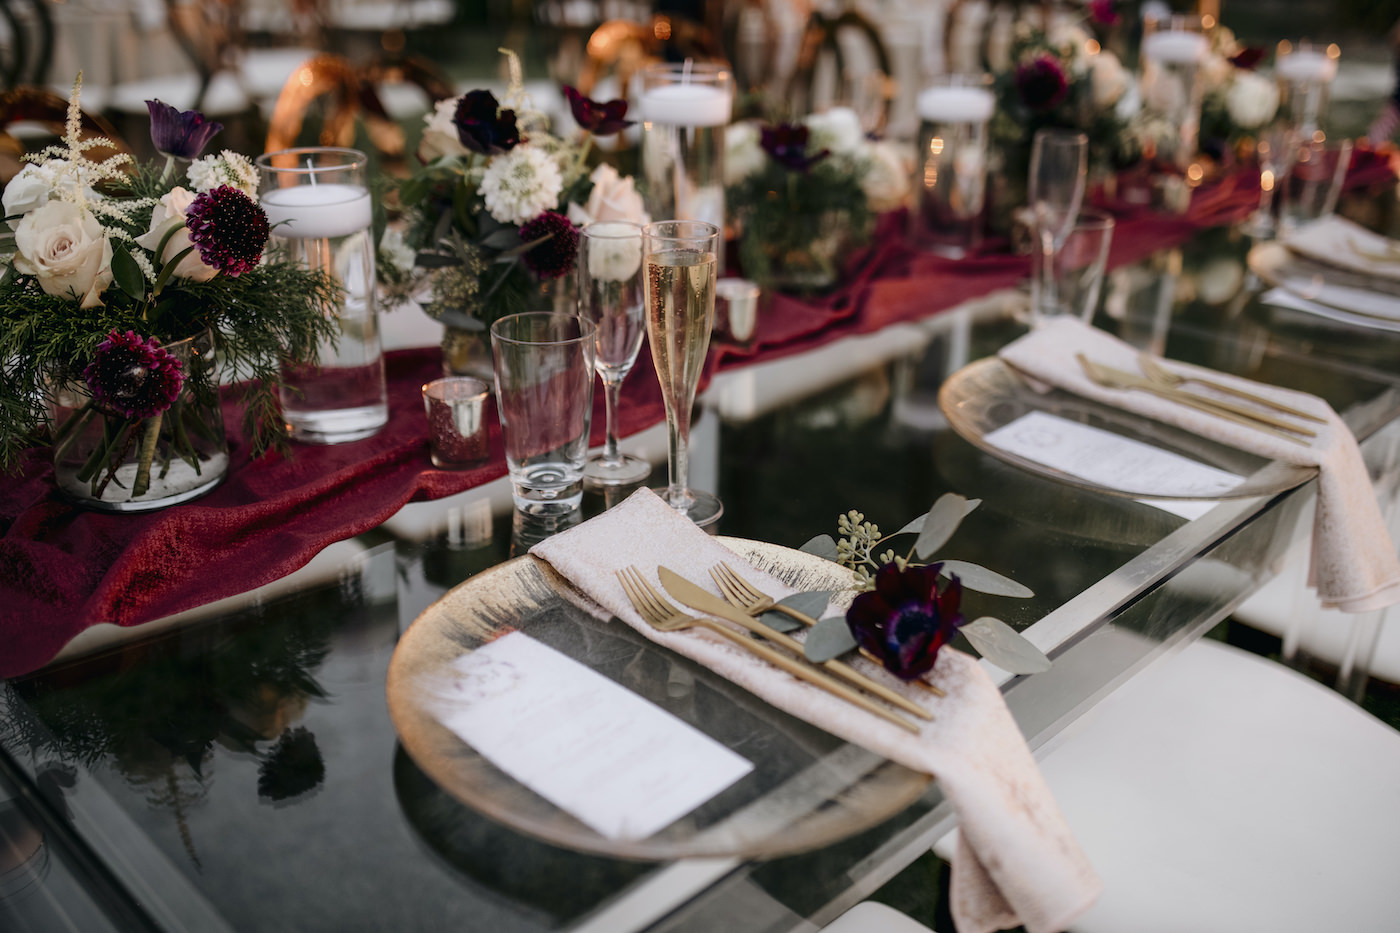 Outdoor Sarasota Beach Neutral Gold and Champagne Wedding Reception Table with Gold Glass Charger Plates and Gold Flatware and Red Velvet Table Runner | Gold Geometric Glass Frame Table Number | Gold Compote Vase Wedding Centerpiece with Floating Candles and White and Maroon Flowers and Greenery